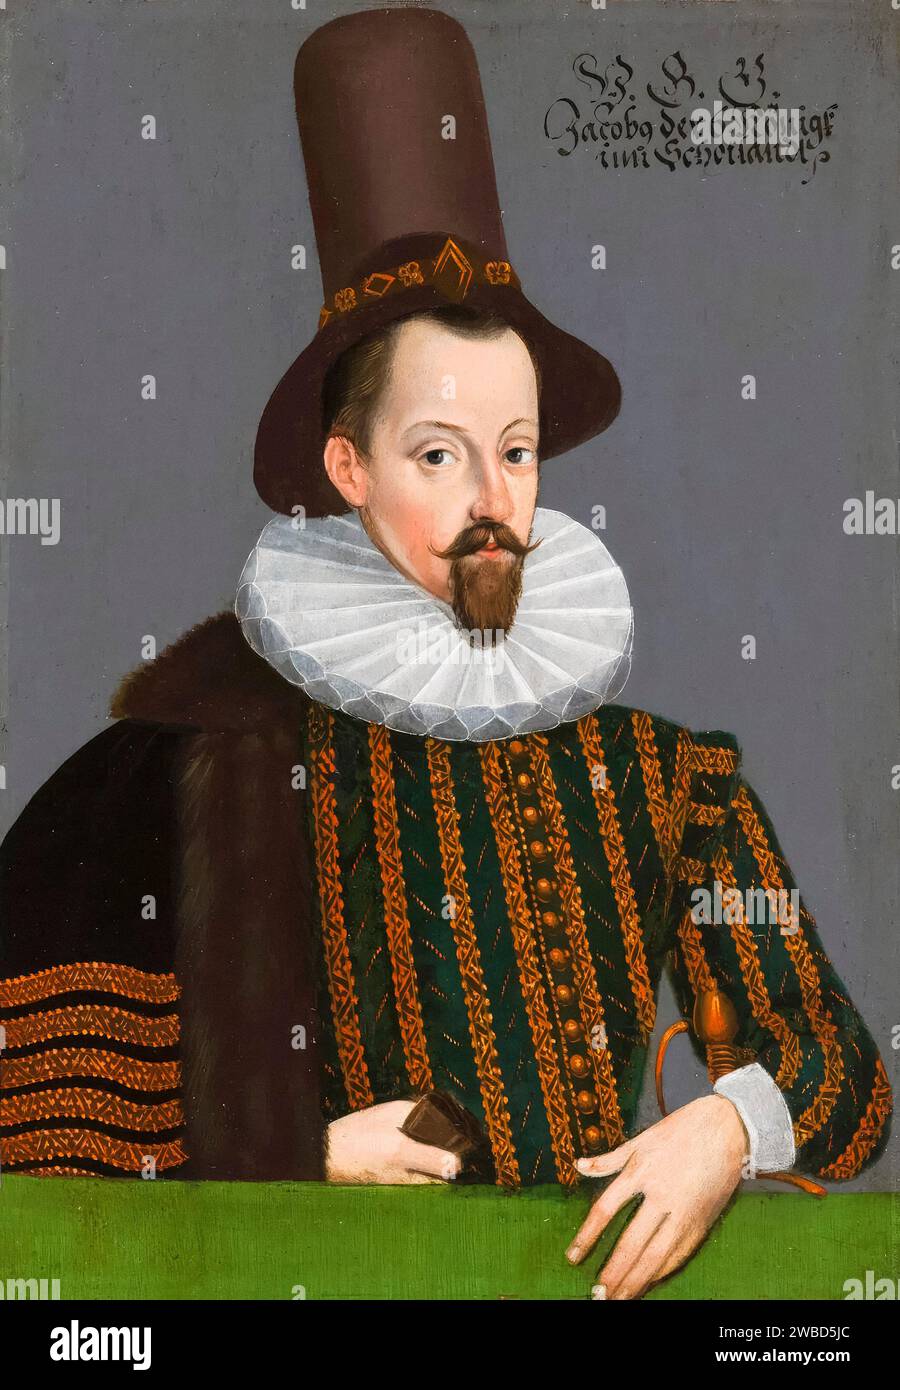 James I of England (James VI of Scotland) (1566-1625), portrait painting in oil on panel by unknown artist, circa 1590 Stock Photo